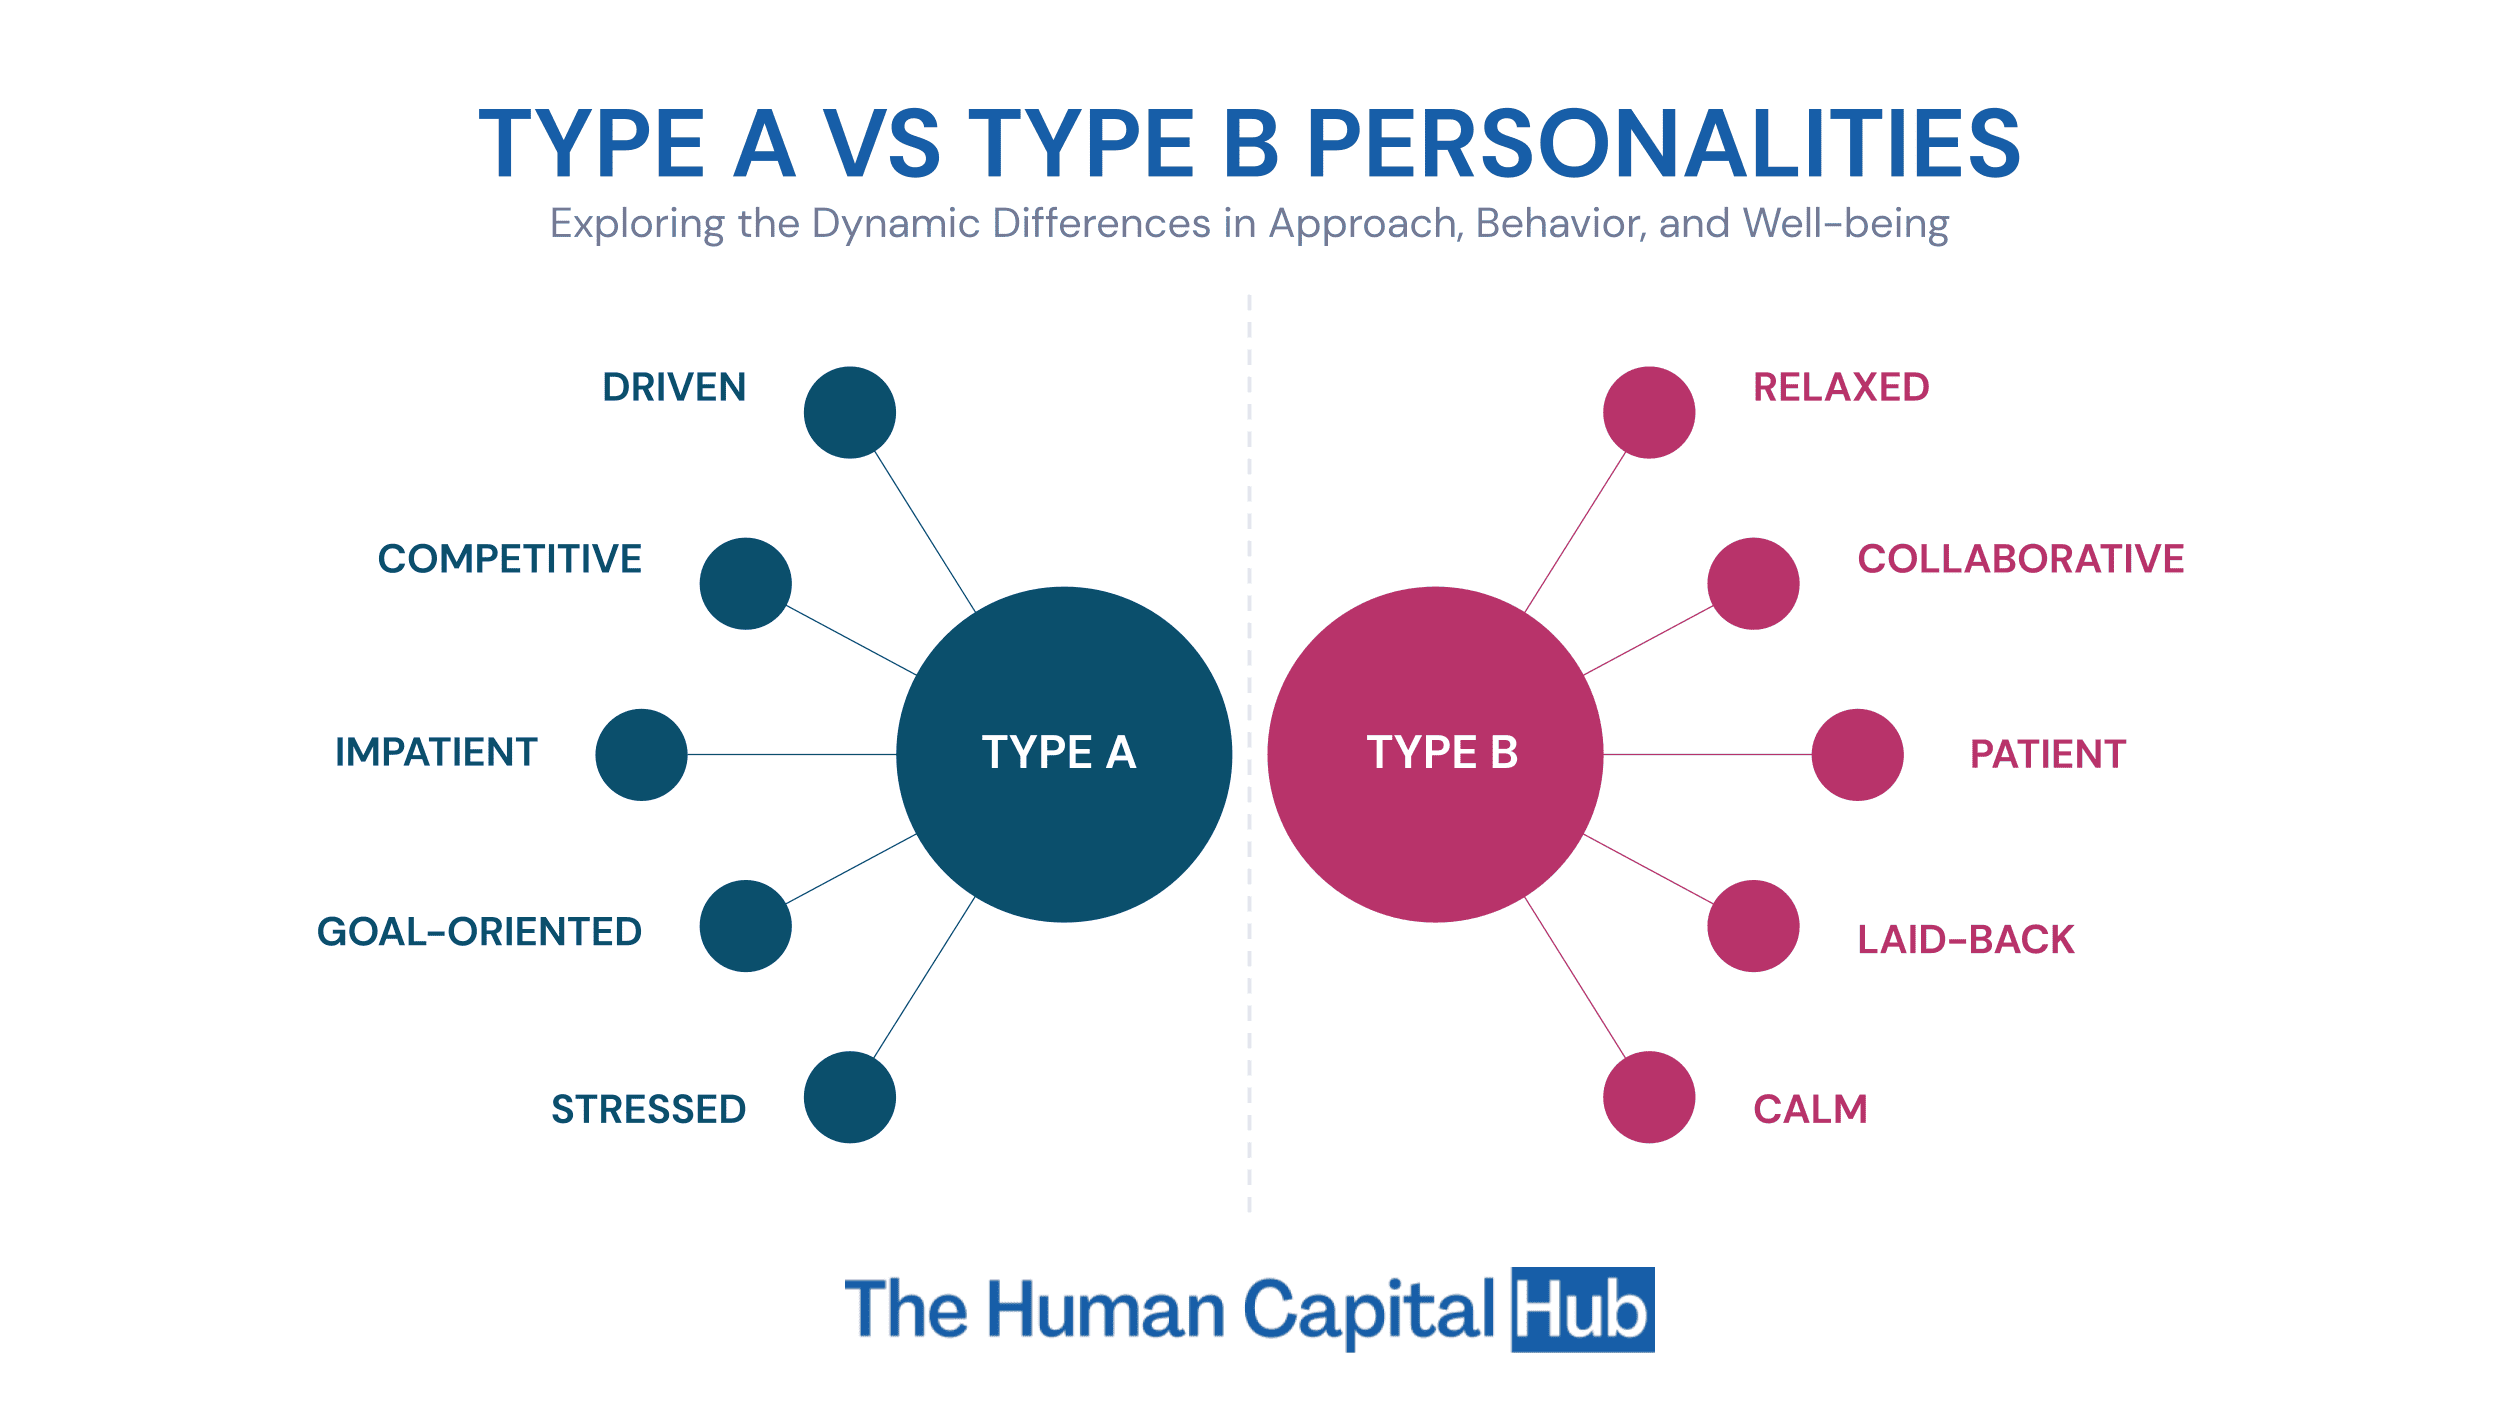 Type A Personality vs Type B Personality